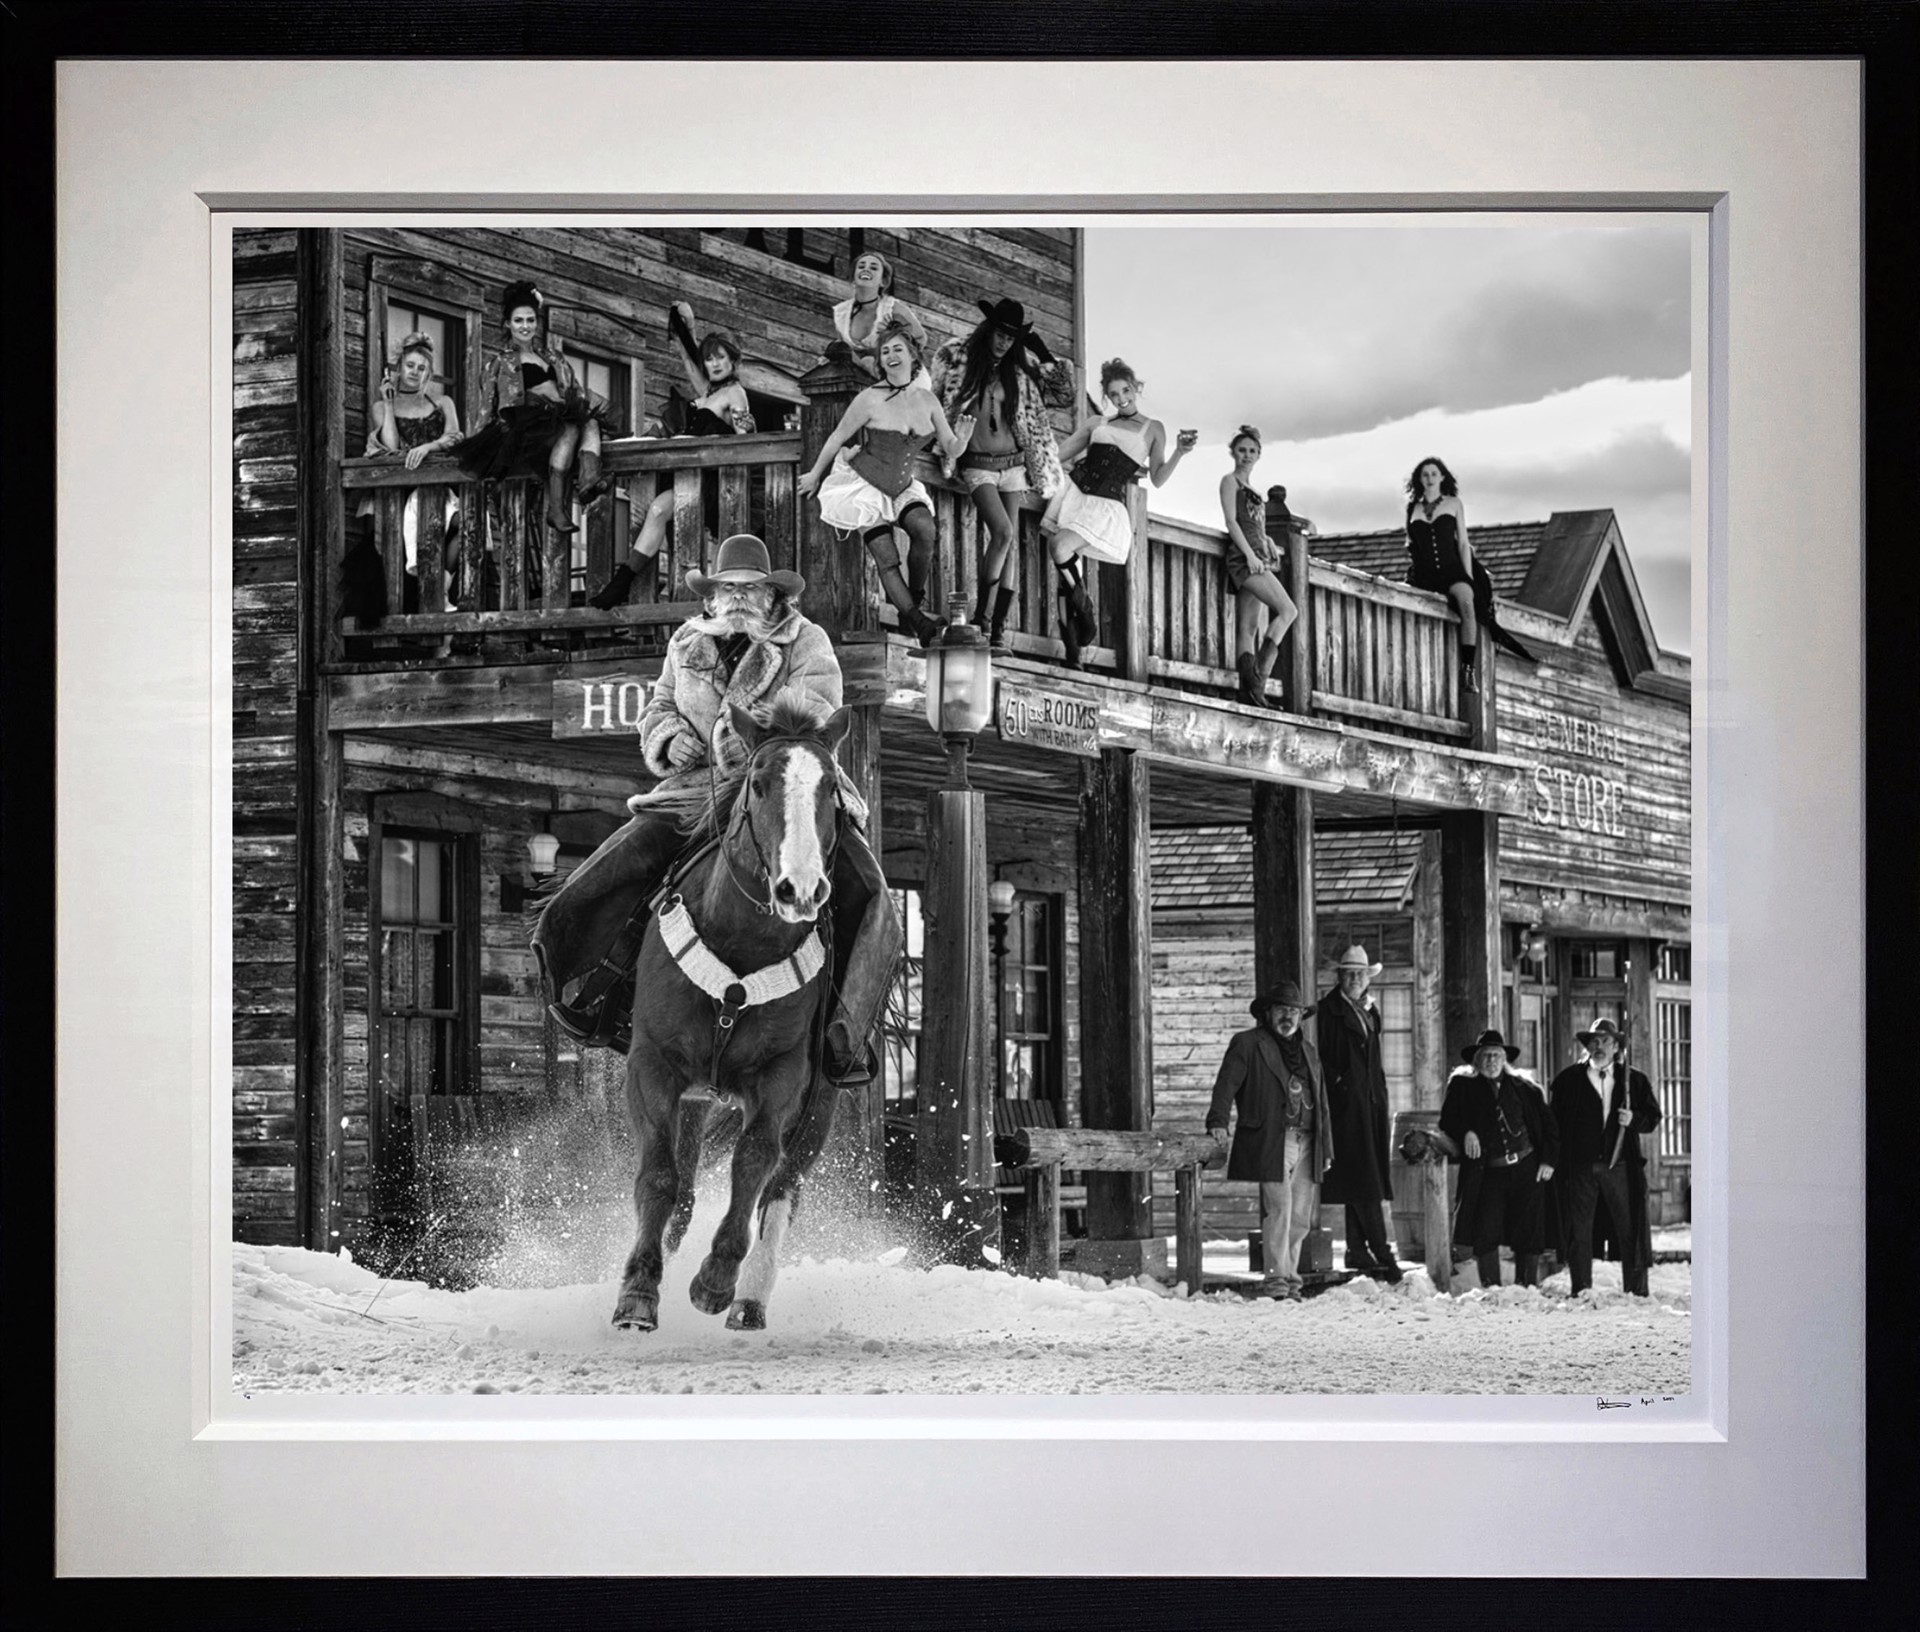 Mamas Don't Let Your Children Grow Up To Become Cowboys by David Yarrow